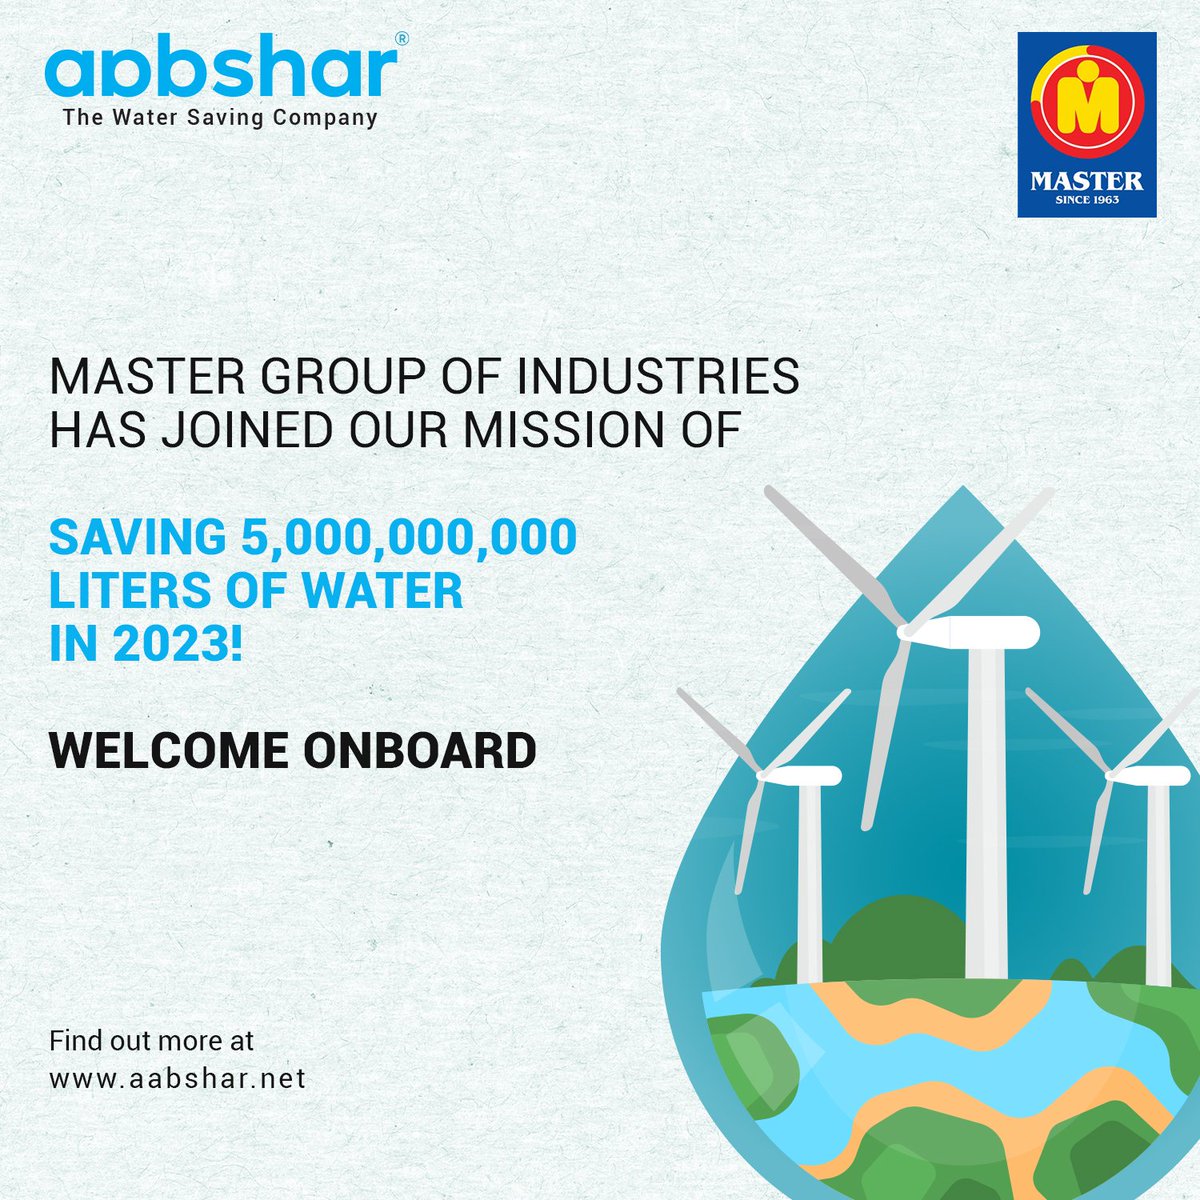 We are beyond excited to have Master Group of Industries as partners, who share our mission of saving 5 billion liters of water in 2023! 

#Mission2023 #PartnersForChange